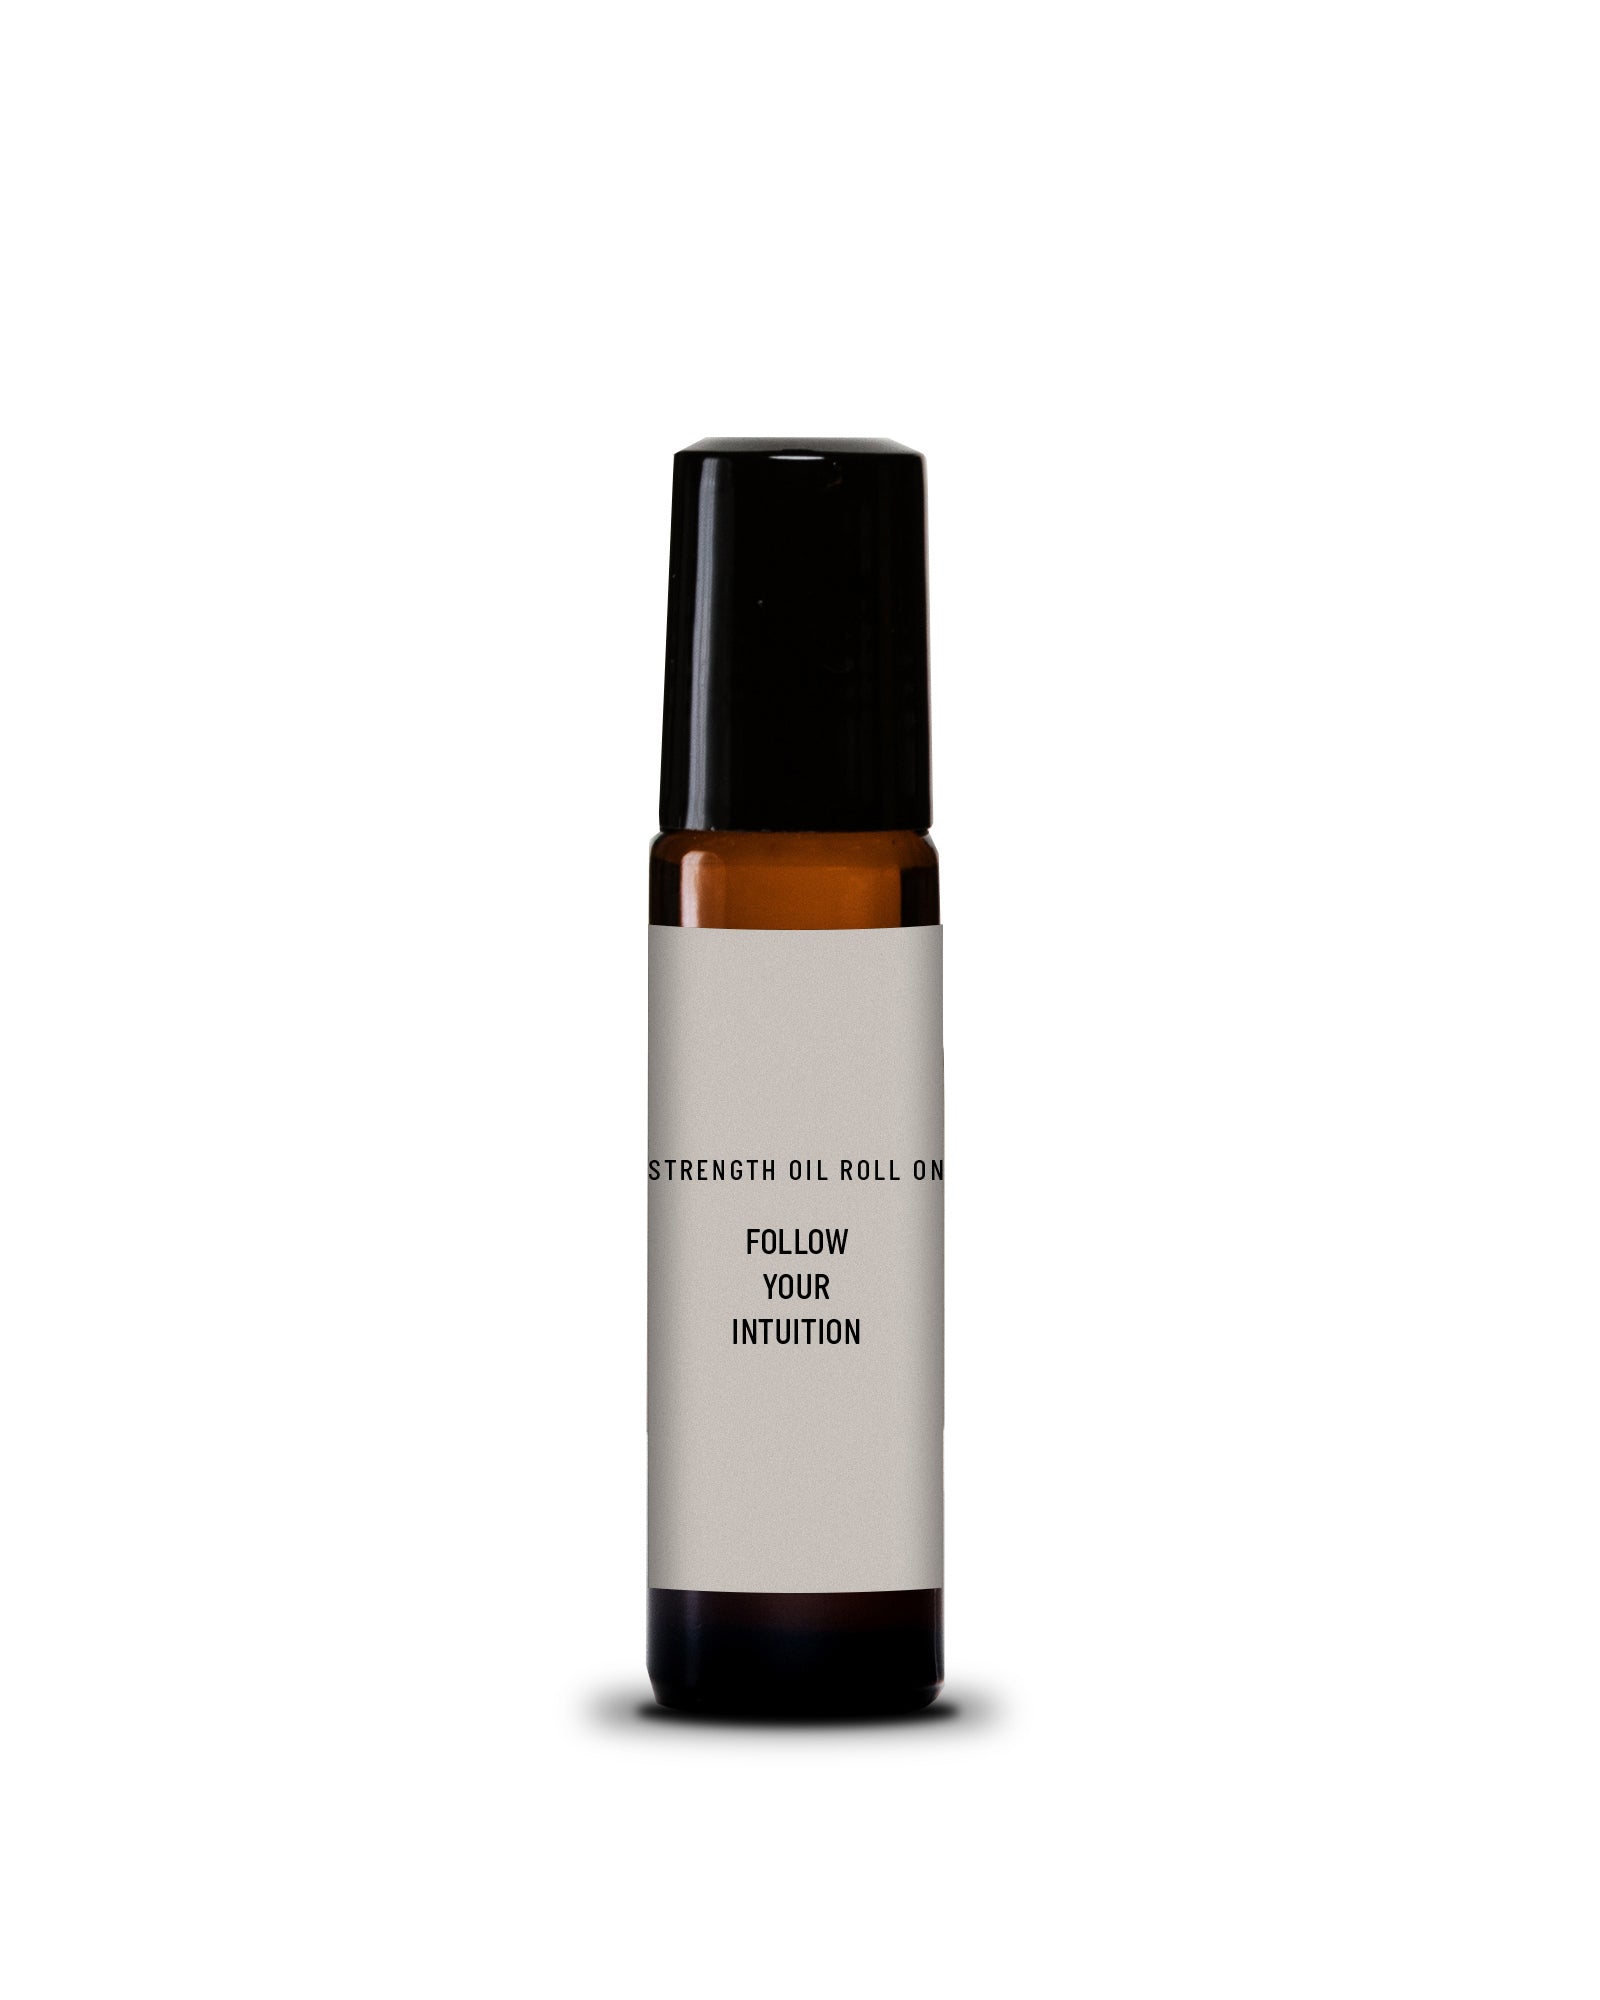 Mama Matters - Aromaöl / Strength Oil Roll On | Follow your Intuition - Leja Concept Store